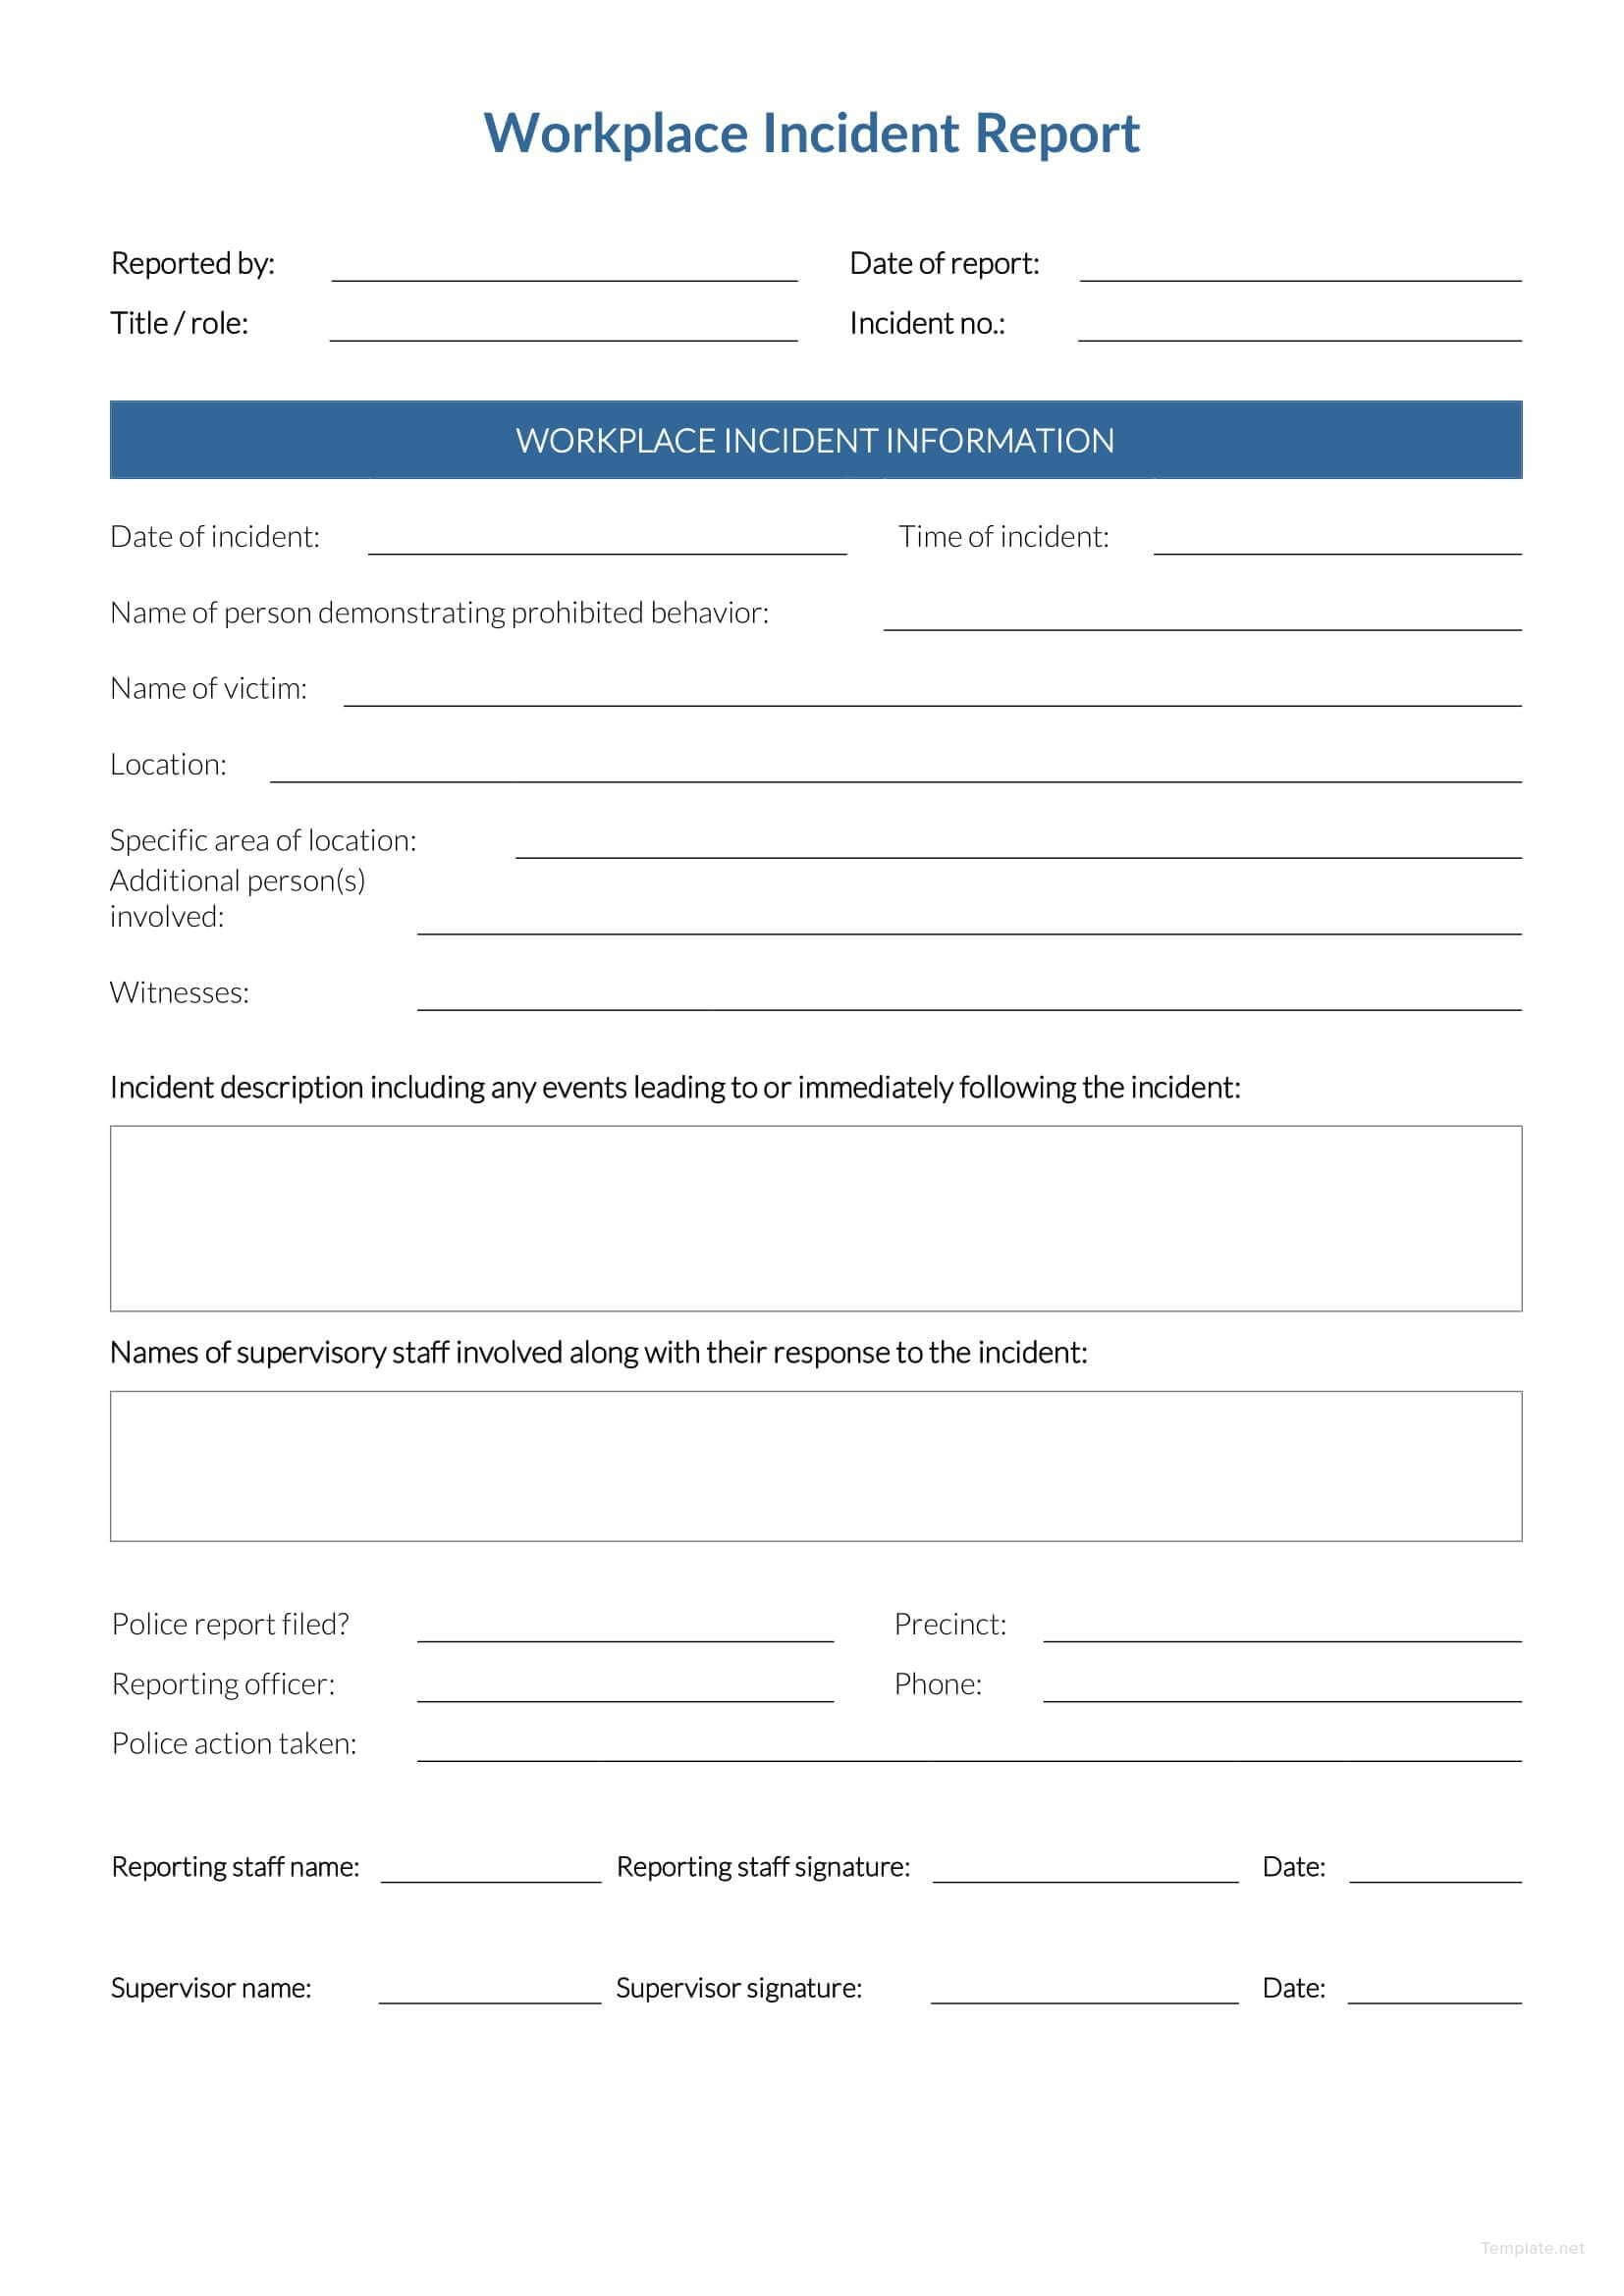 Free Workplace Incident Report | Incident Report, Report Intended For Office Incident Report Template